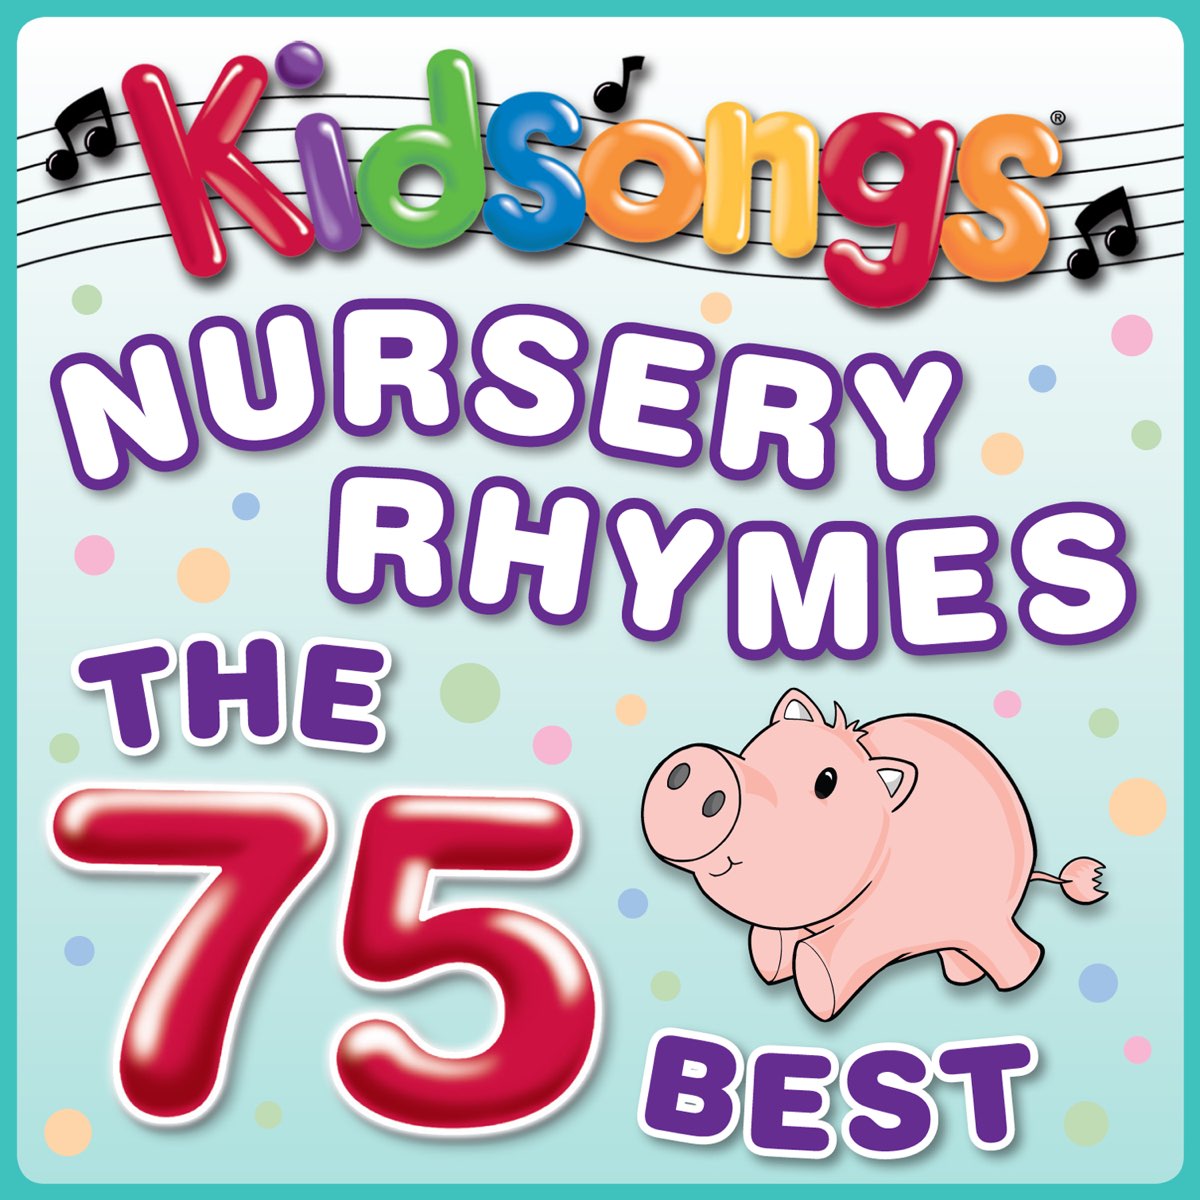 Head Start - What are your favorite nursery rhymes to sing with